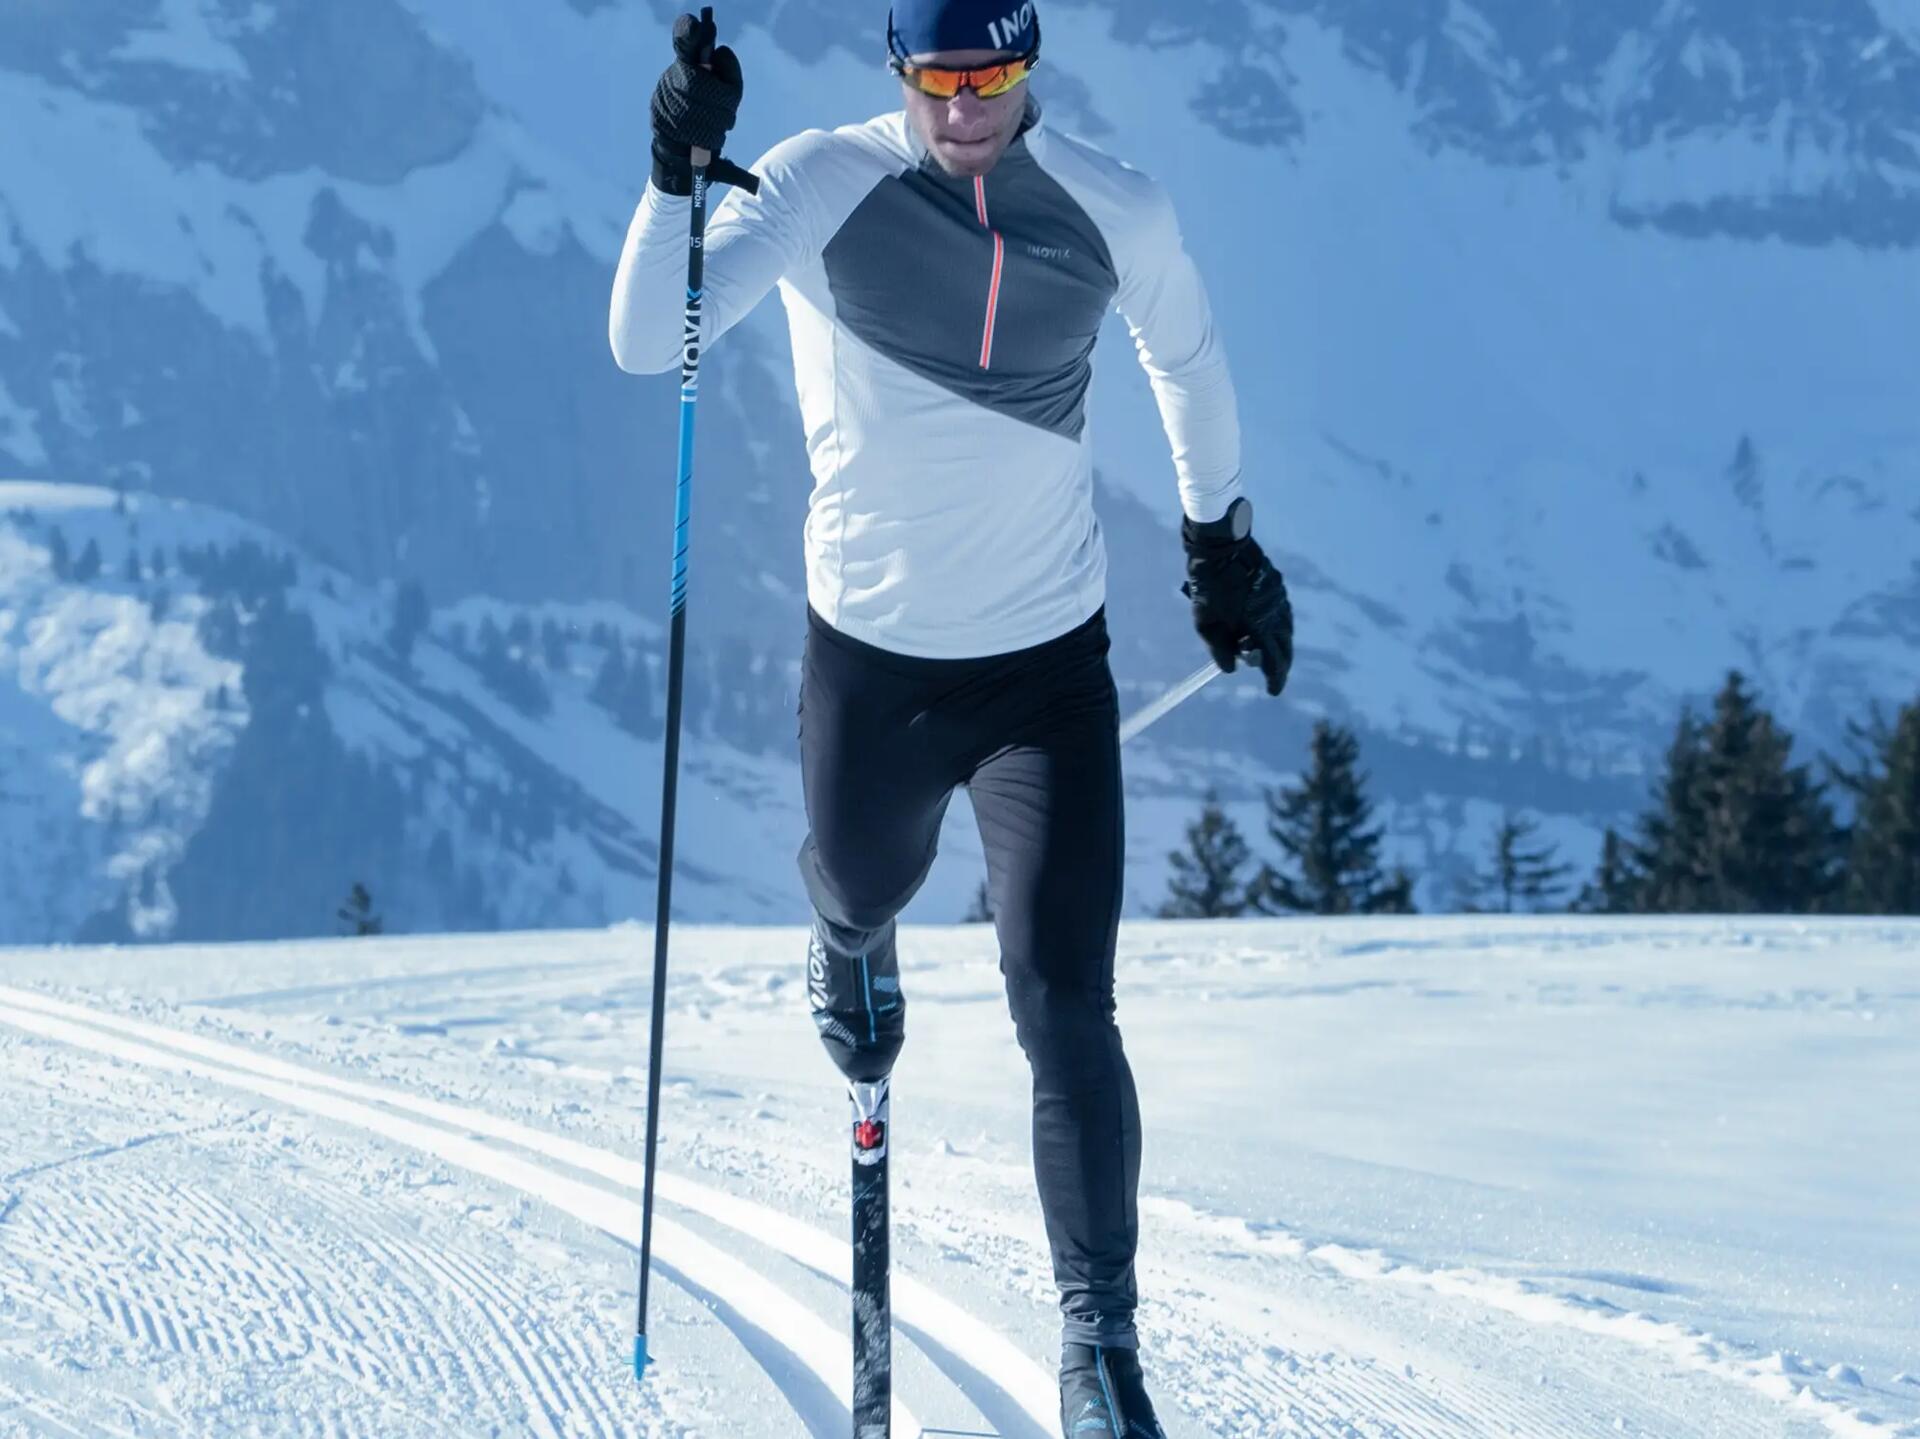 advanced-level classic cross-country skiing